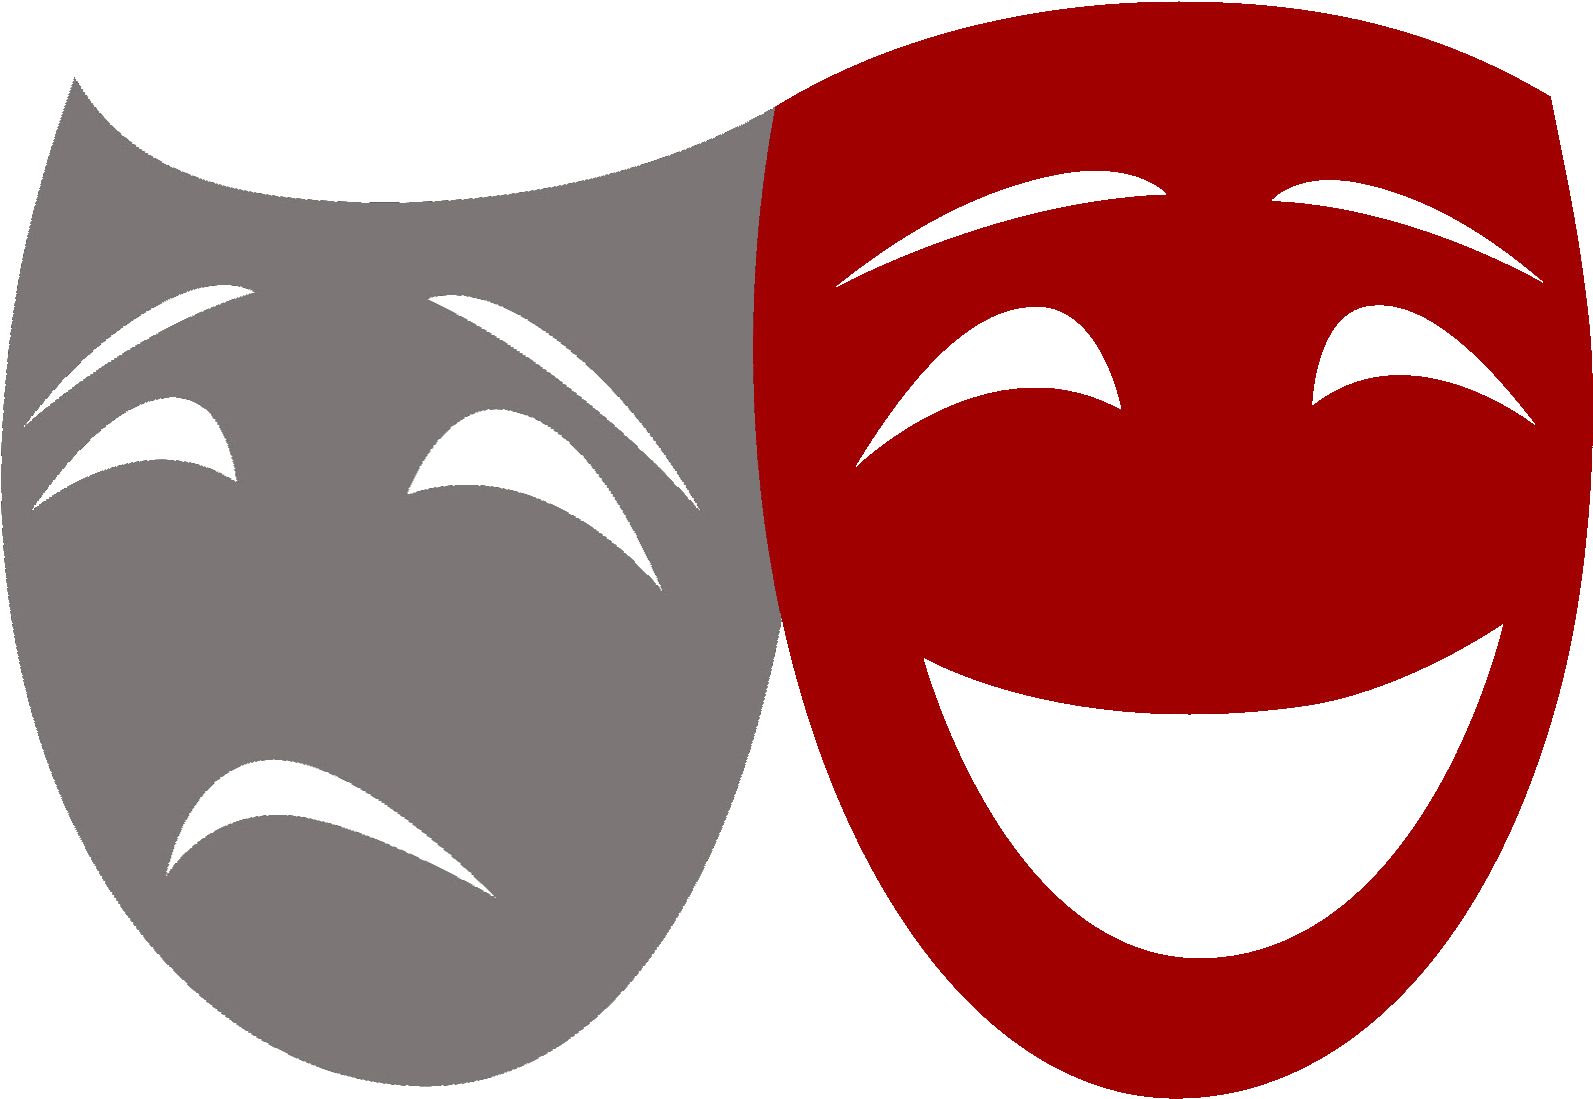 838-8380341_theater-masks-wiki-.png